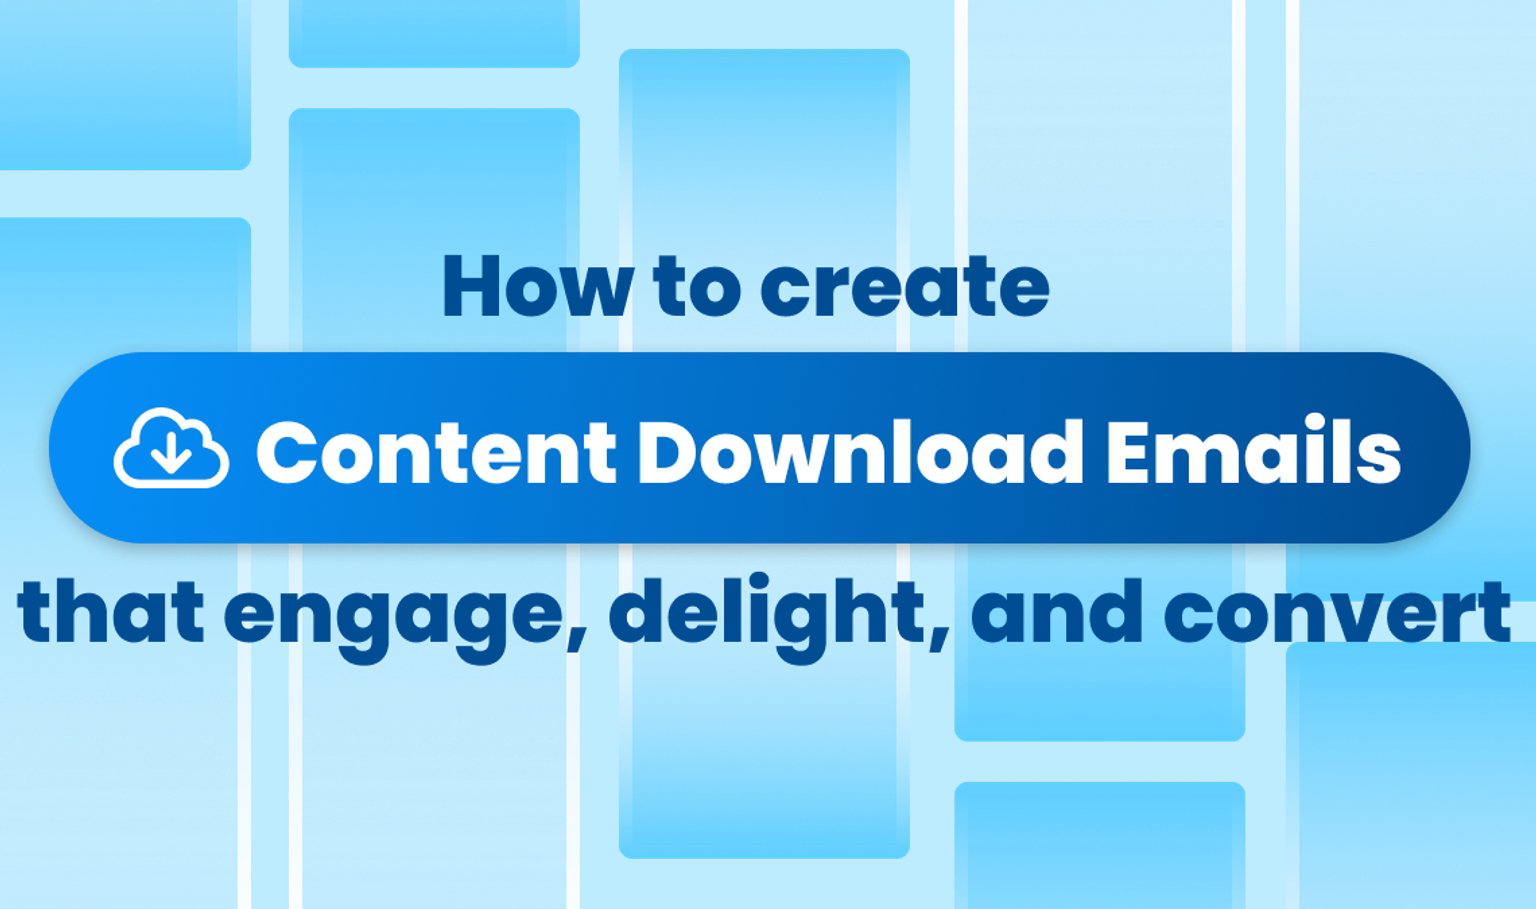 How to create content download emails that engage, delight, and convert